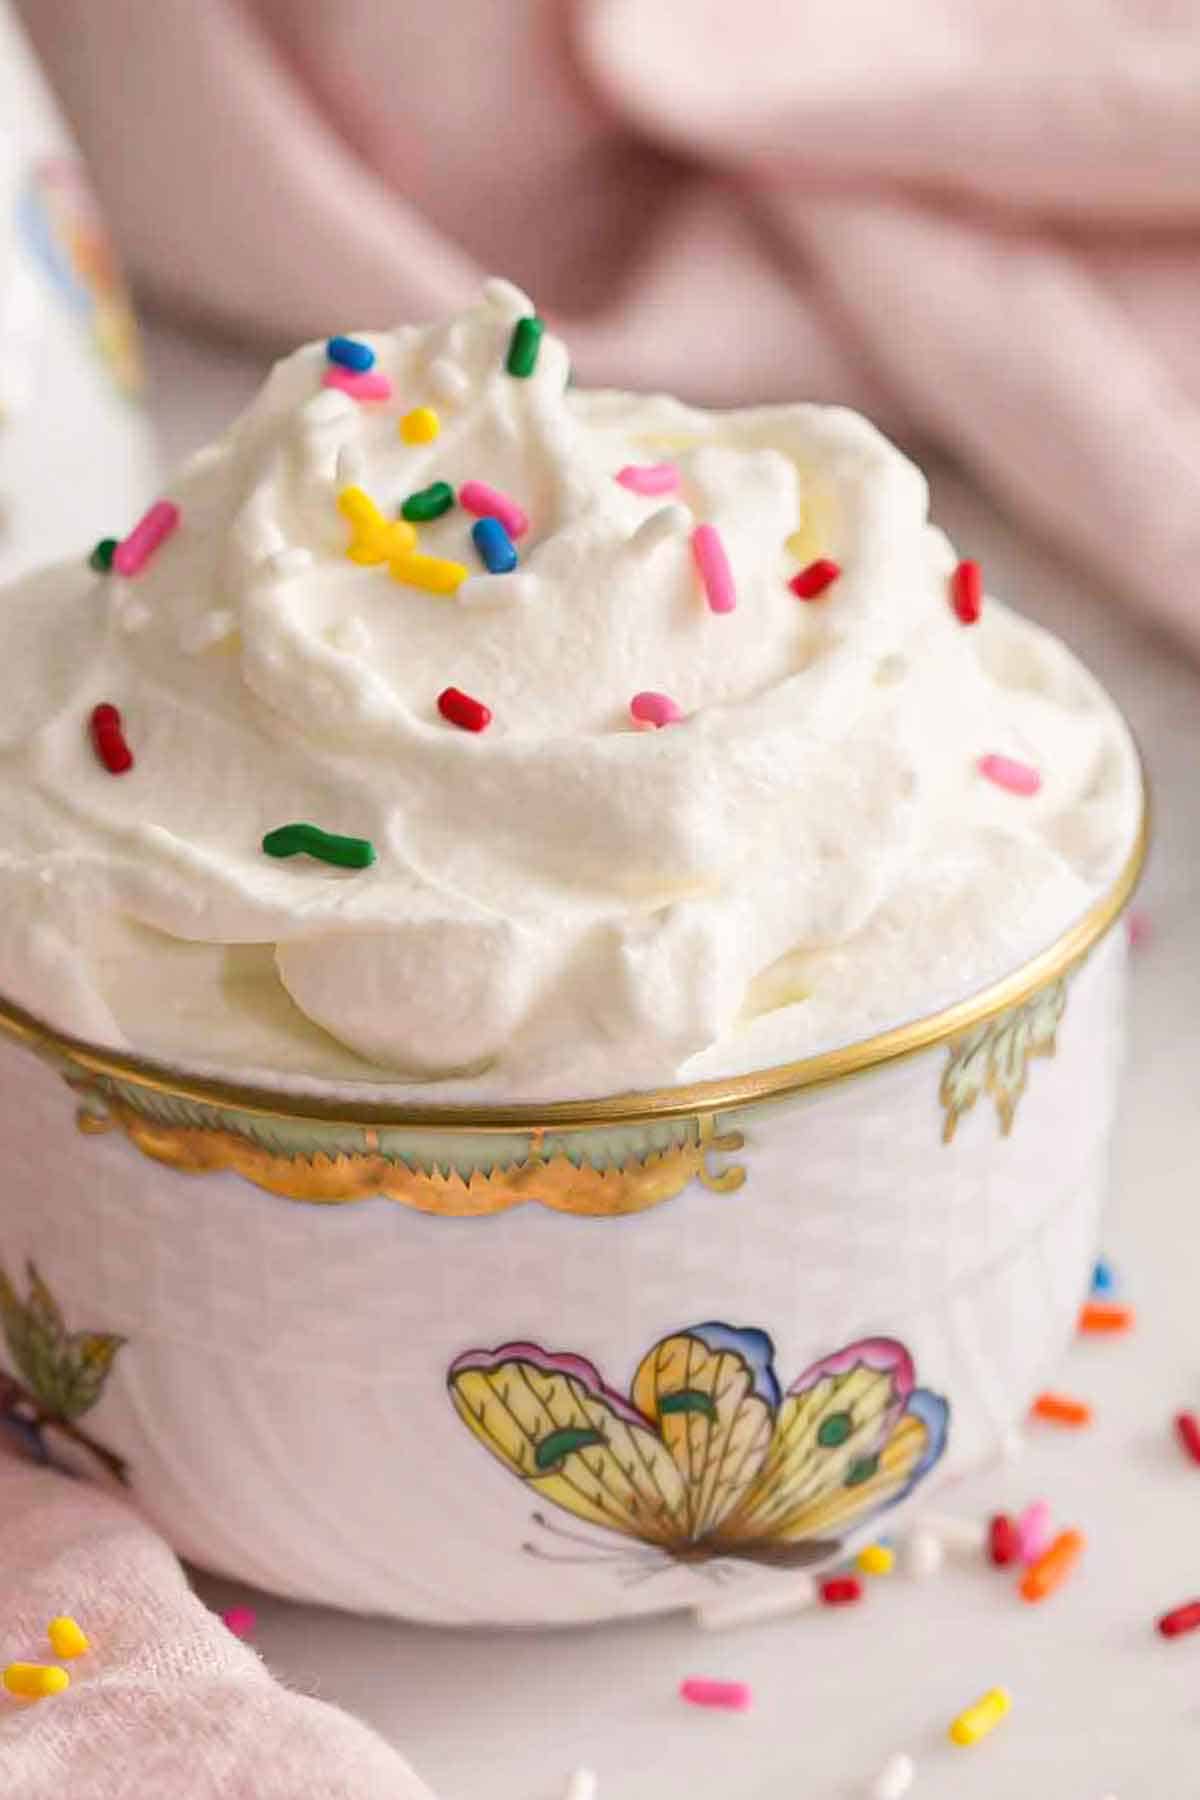 A profile view of a bowl of whipped cream topped with rainbow sprinkles.